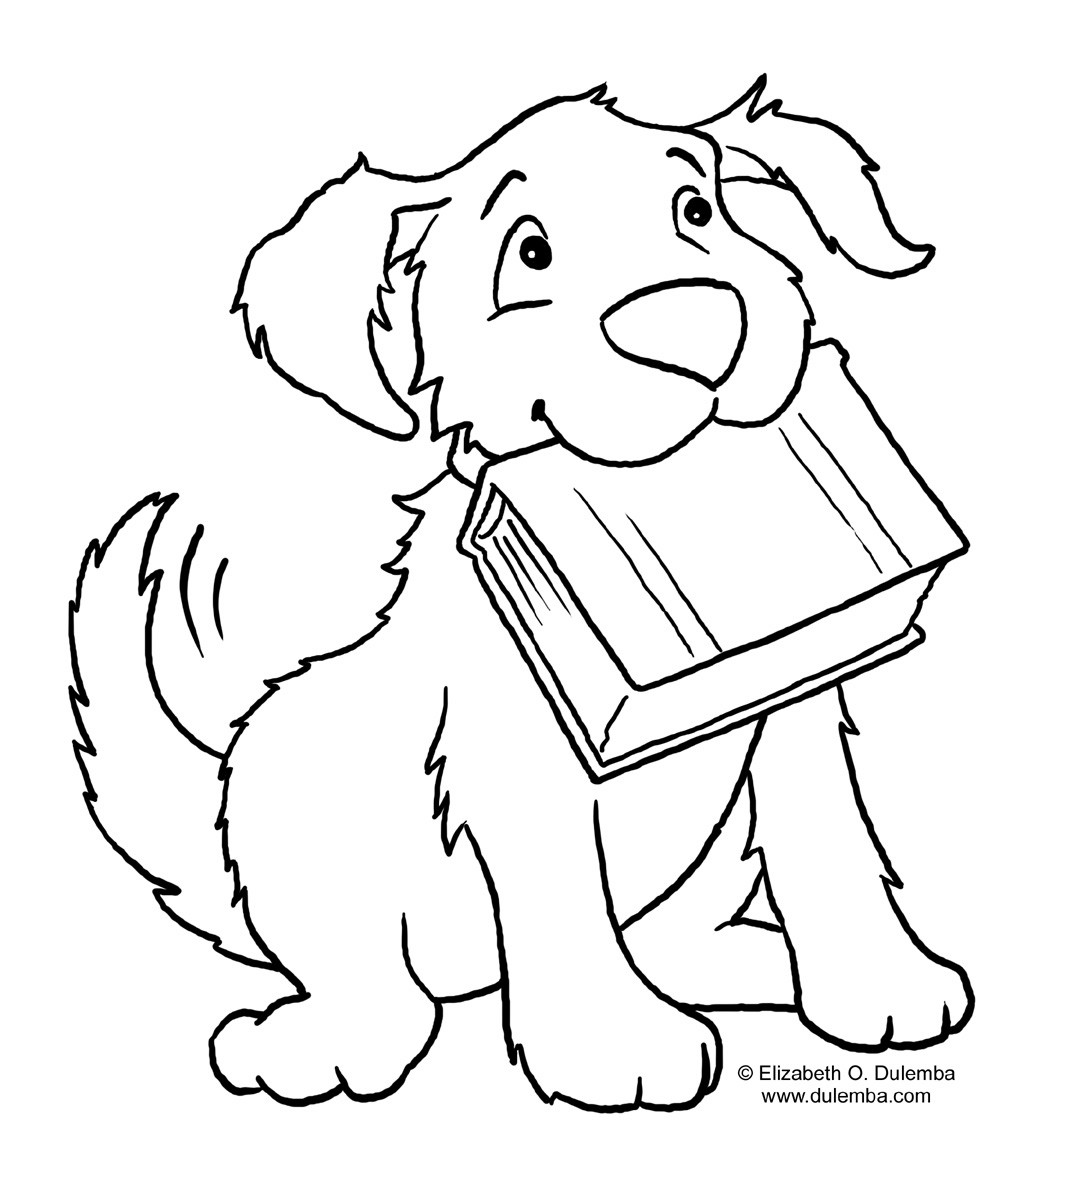 The Best Ideas for Coloring Pages for Kids Dog - Home Inspiration and